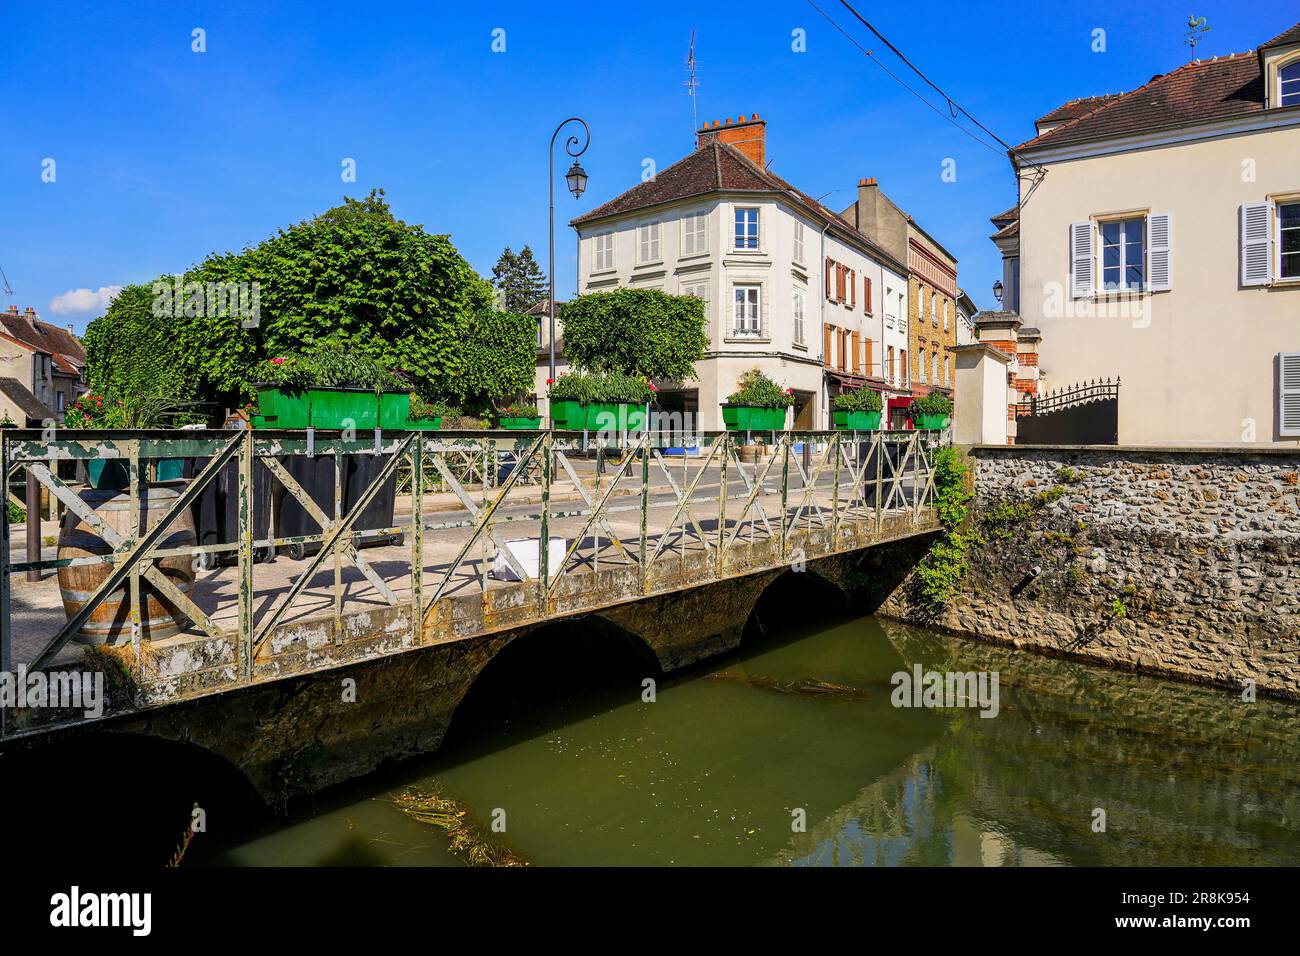 Bridge in Crécy la Chapelle, a village of the French department of Seine et Marne in Paris region often nicknamed 'Little Venice of Brie' due to the G Stock Photo